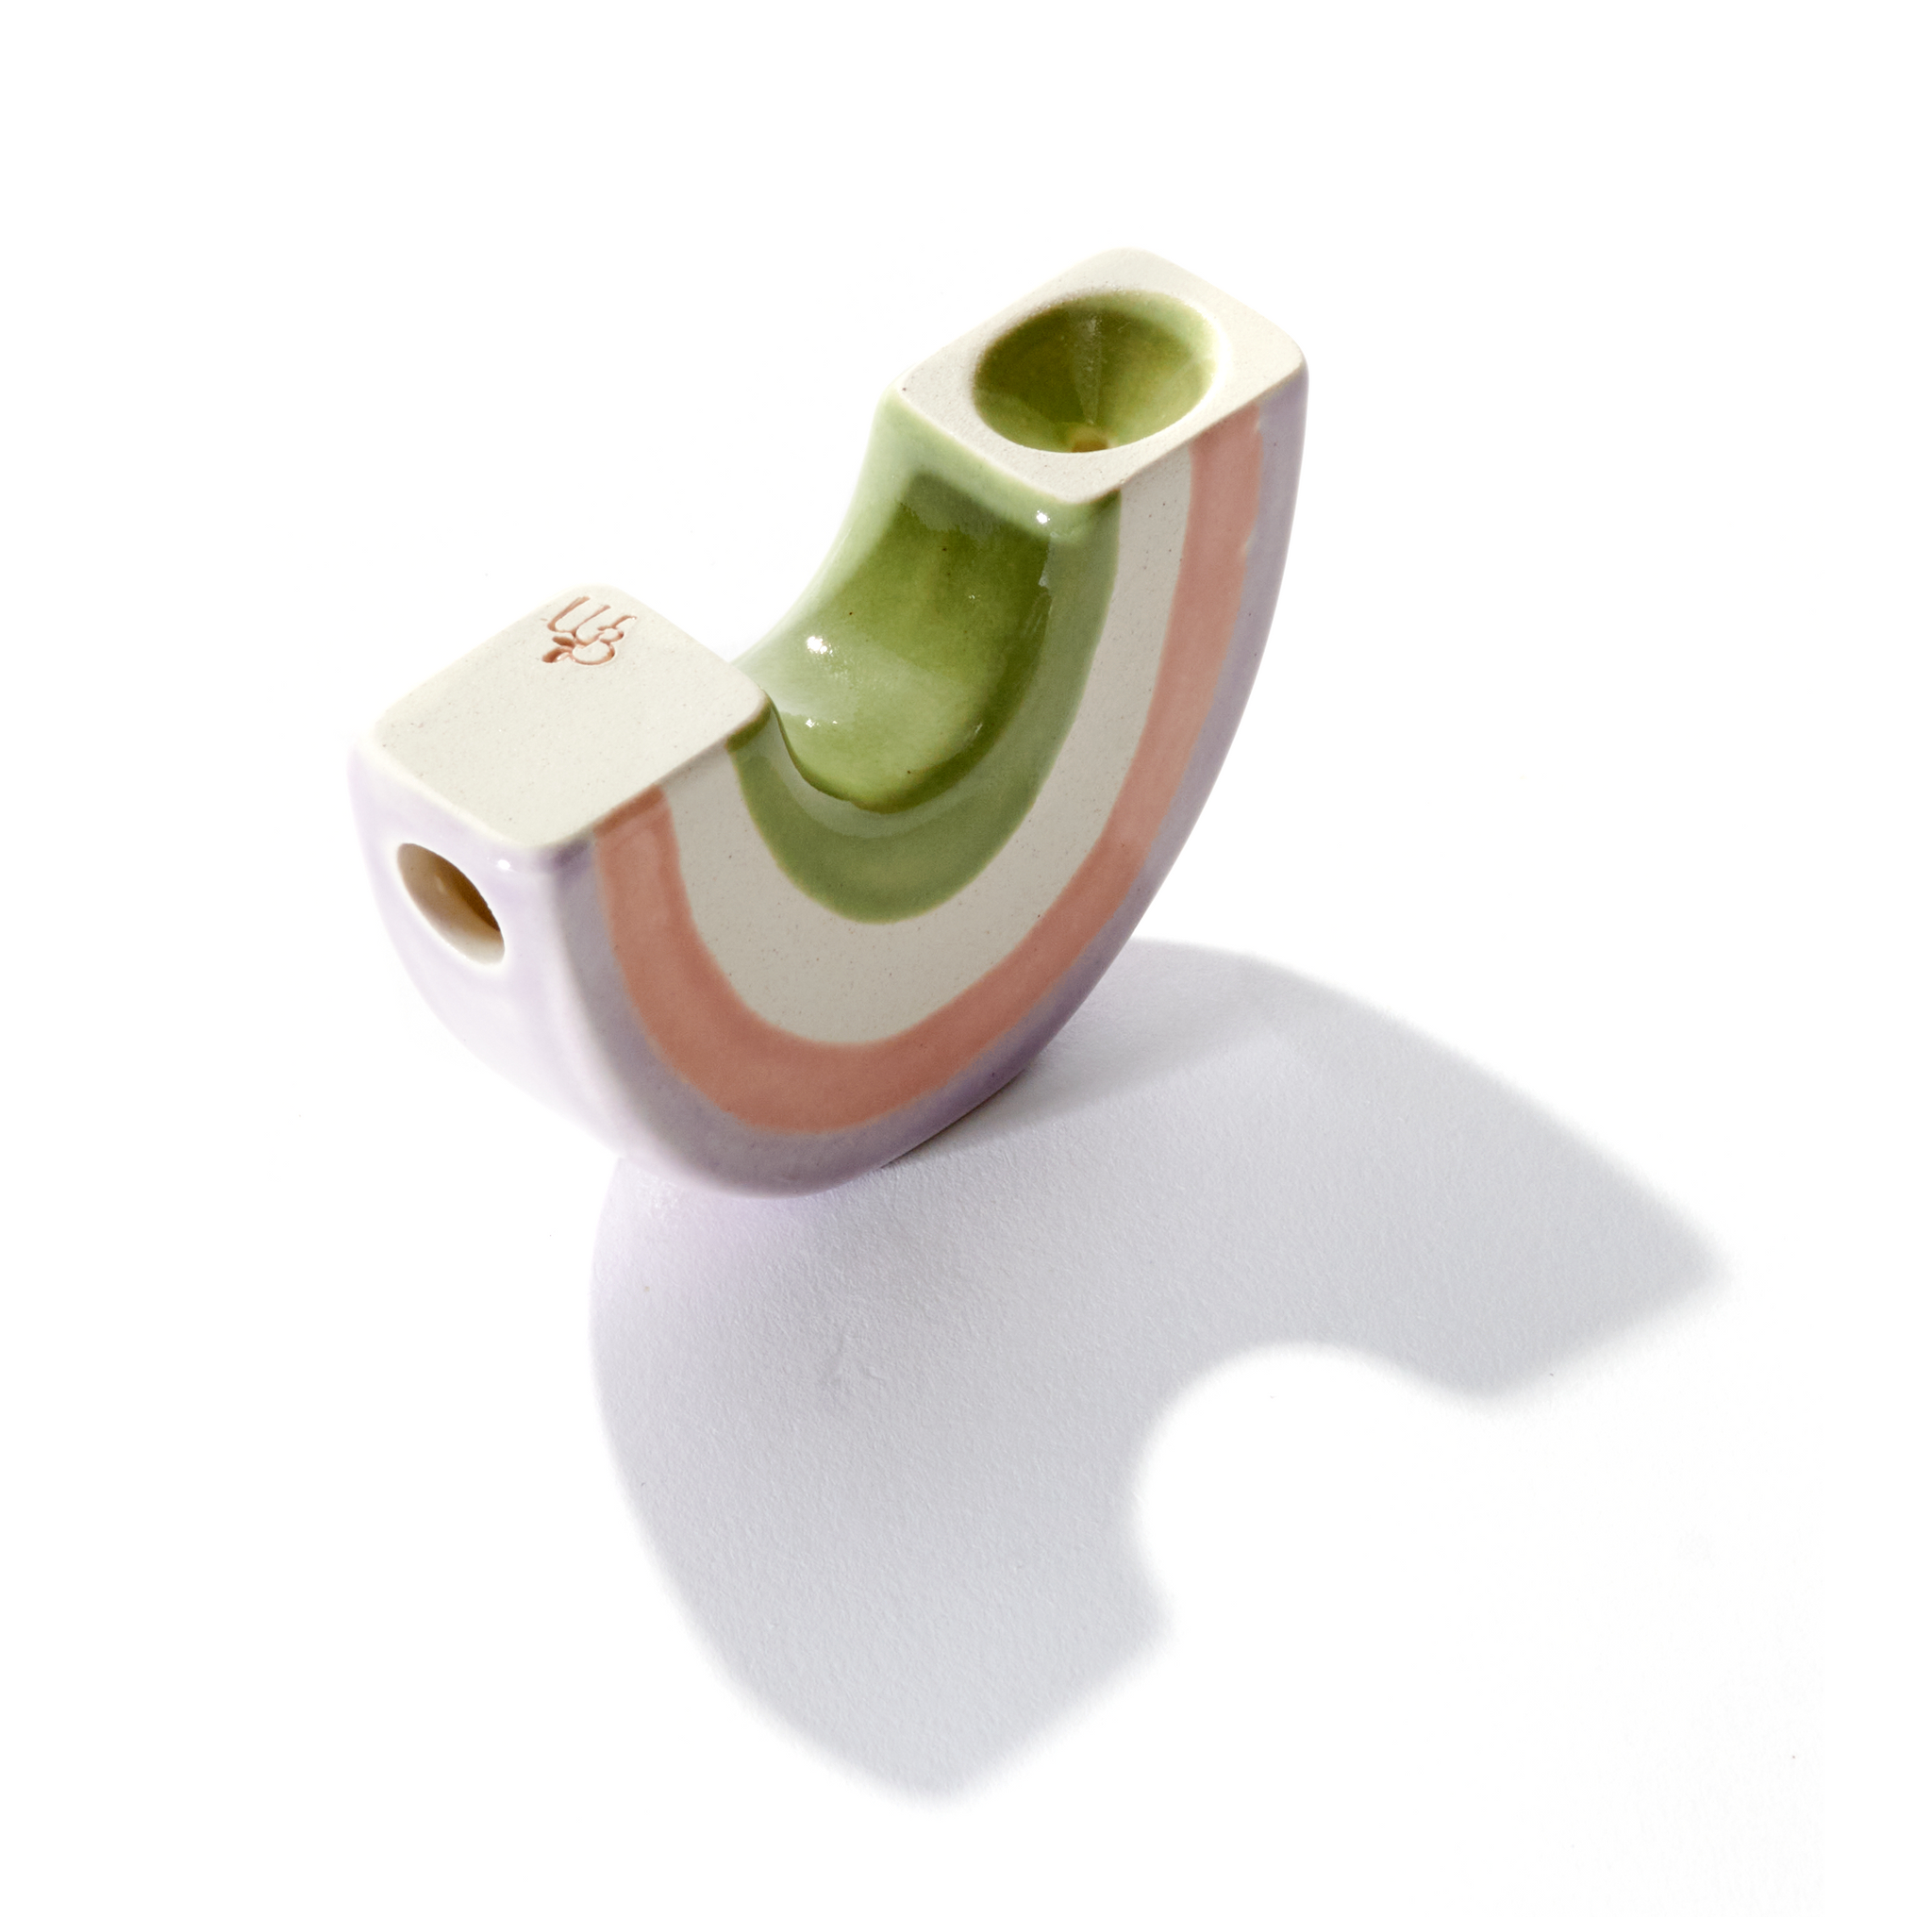 A ceramic rainbow-shaped pipe that smokes like a dream and feels great in the hand, this hand pipe is handmade by a woman-owned studio in the USA. Rainbow pipe is green, purple, beige pink colored ceramic pipe that pairs well with your favorite smoke accessories. Smoke your favorite bud from this ceramic dry pipe. 